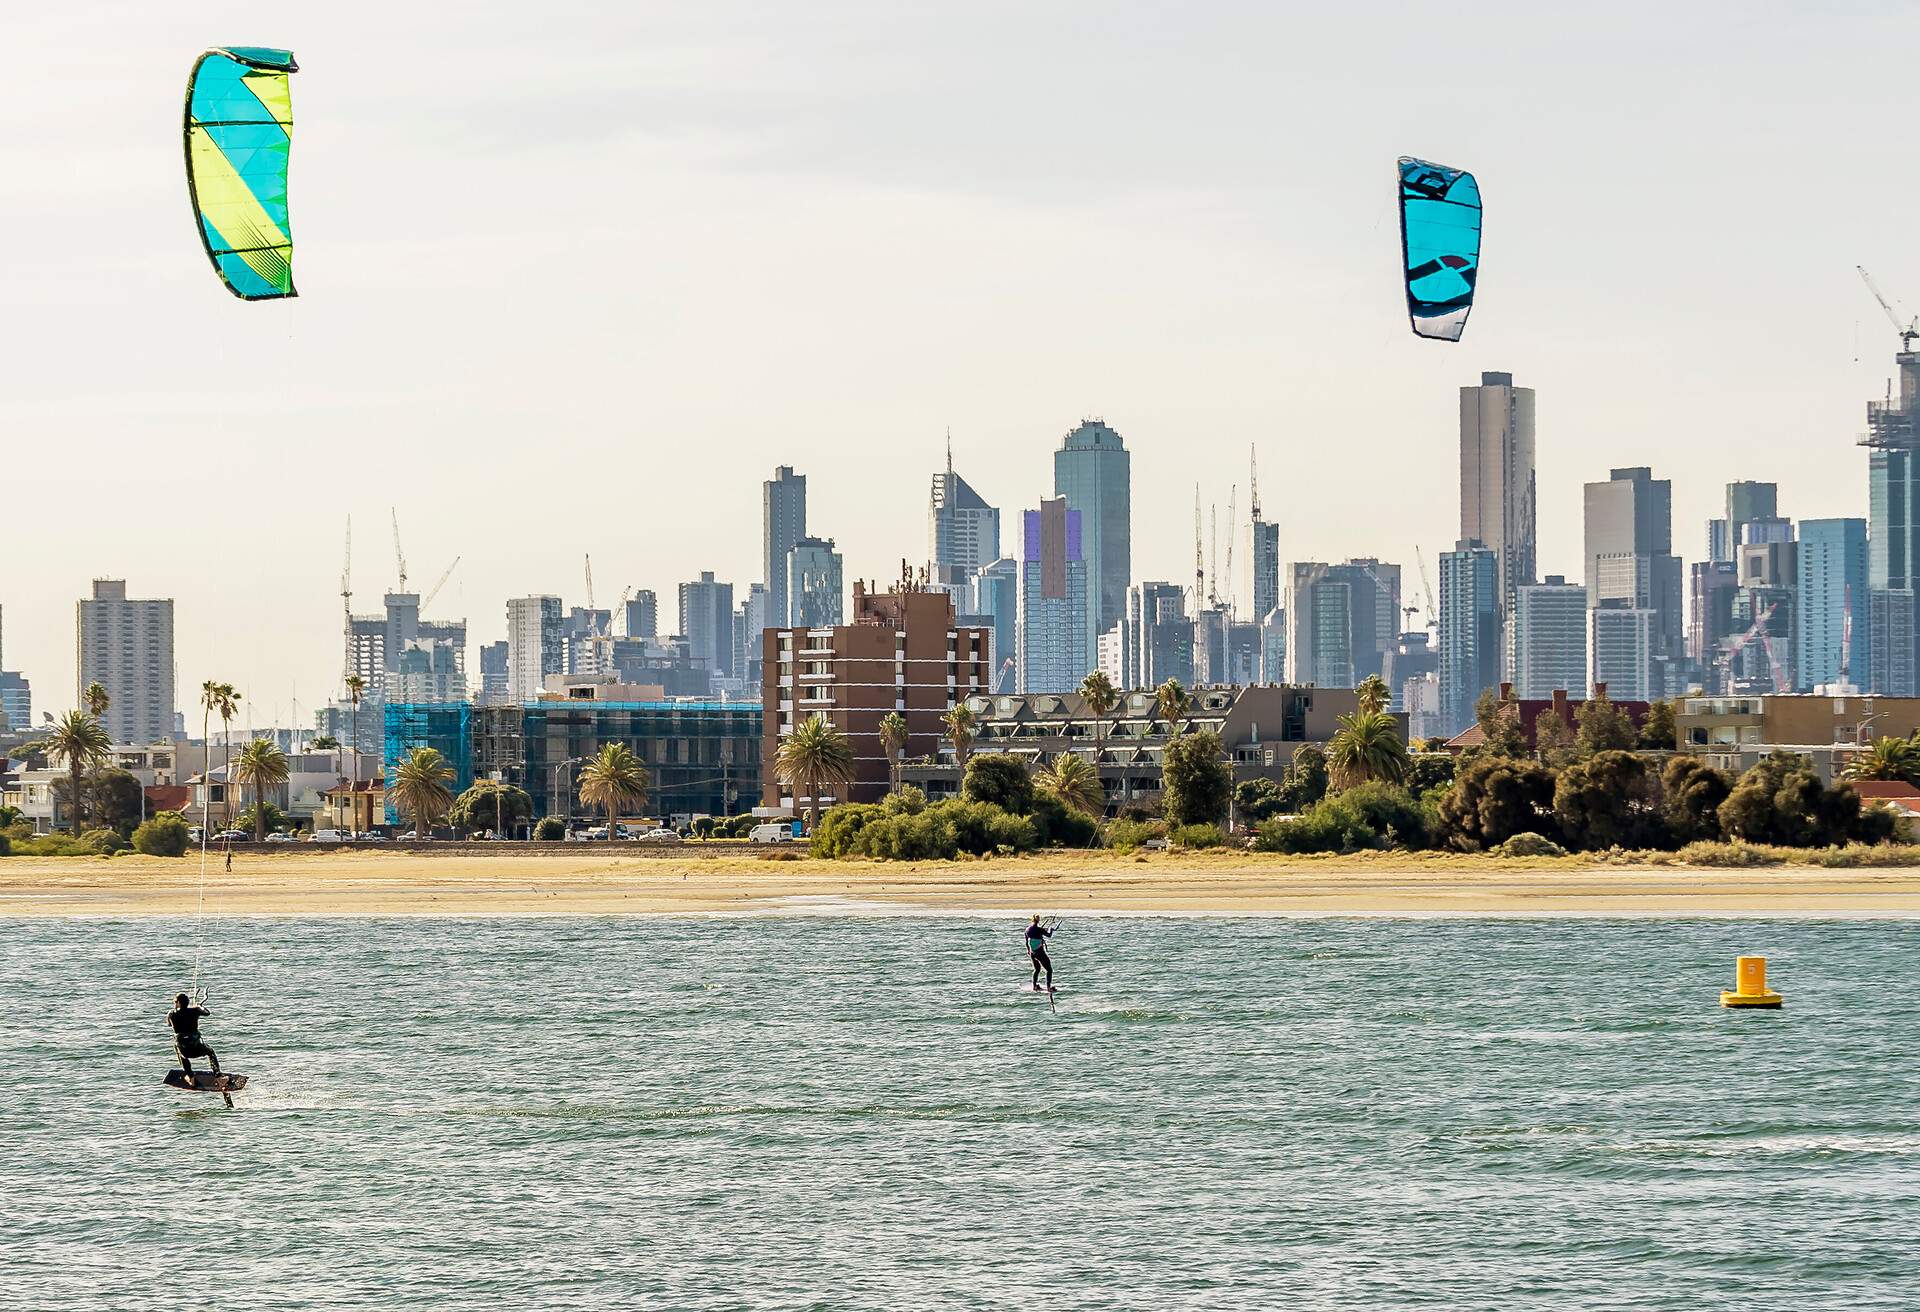 Pair of kitesurfers trains in Port Phillip Bay, with the skyline of Melbourne, Australia in the background.; Shutterstock ID 1461271907